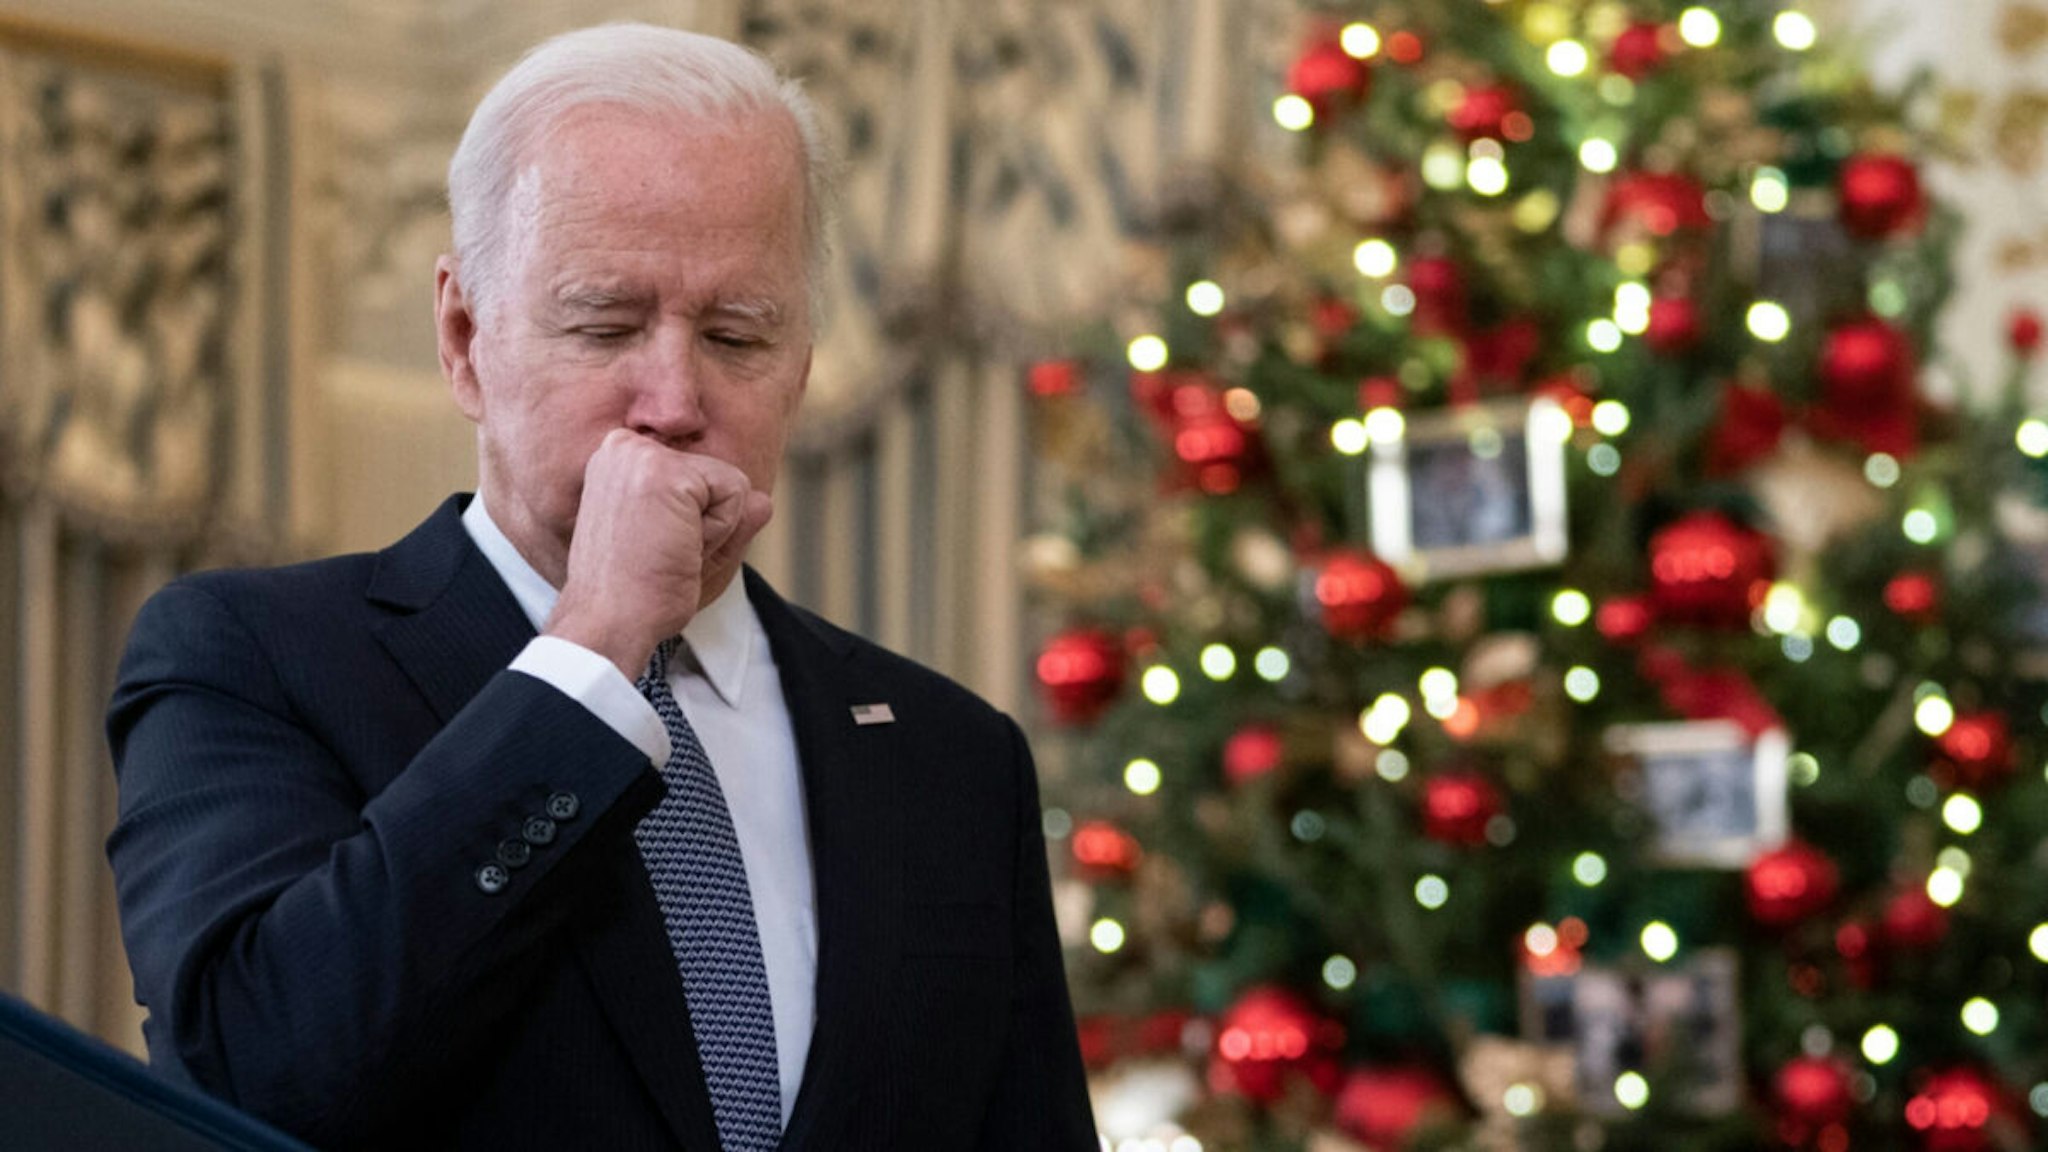 US President Joe Biden coughs as he talks to reporters about the November Jobs Report from the State Dining Room of the White House in Washington, DC, on December 3, 2021.